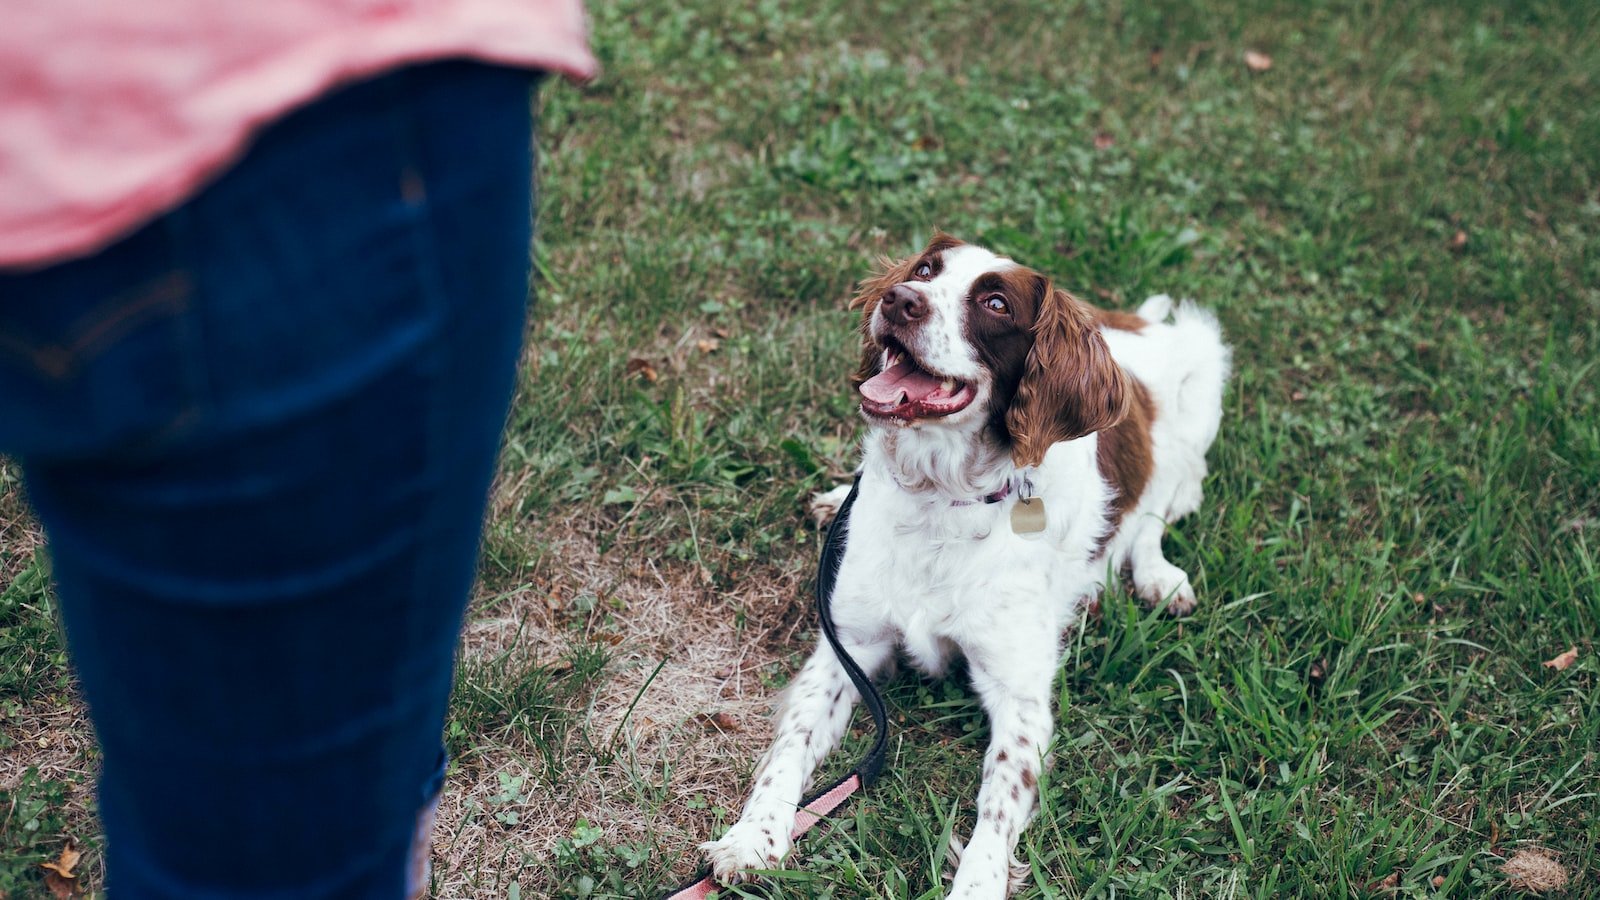 Sit and Stay Commands: Dog Training with Positive Reinforcement